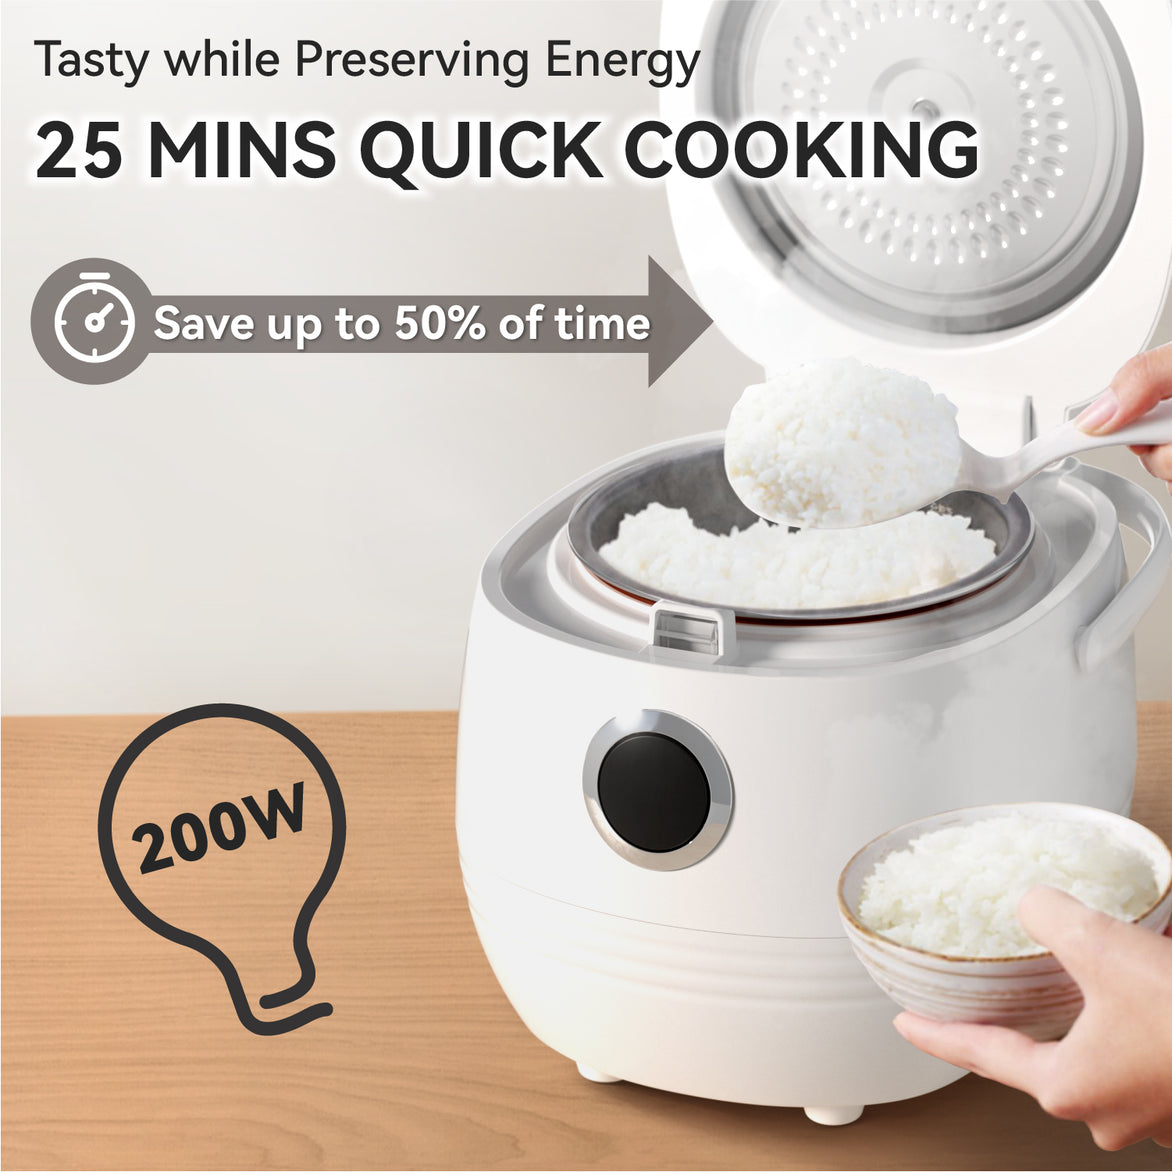 FEEKAA Rice Cooker Small 4-Cup (cooked), Mini Travel Rice Maker, 6-in-1 Portable Rice Cooker' 2 Cup (uncooked), Slow Cooker, Soup Maker, Stew Pot, White